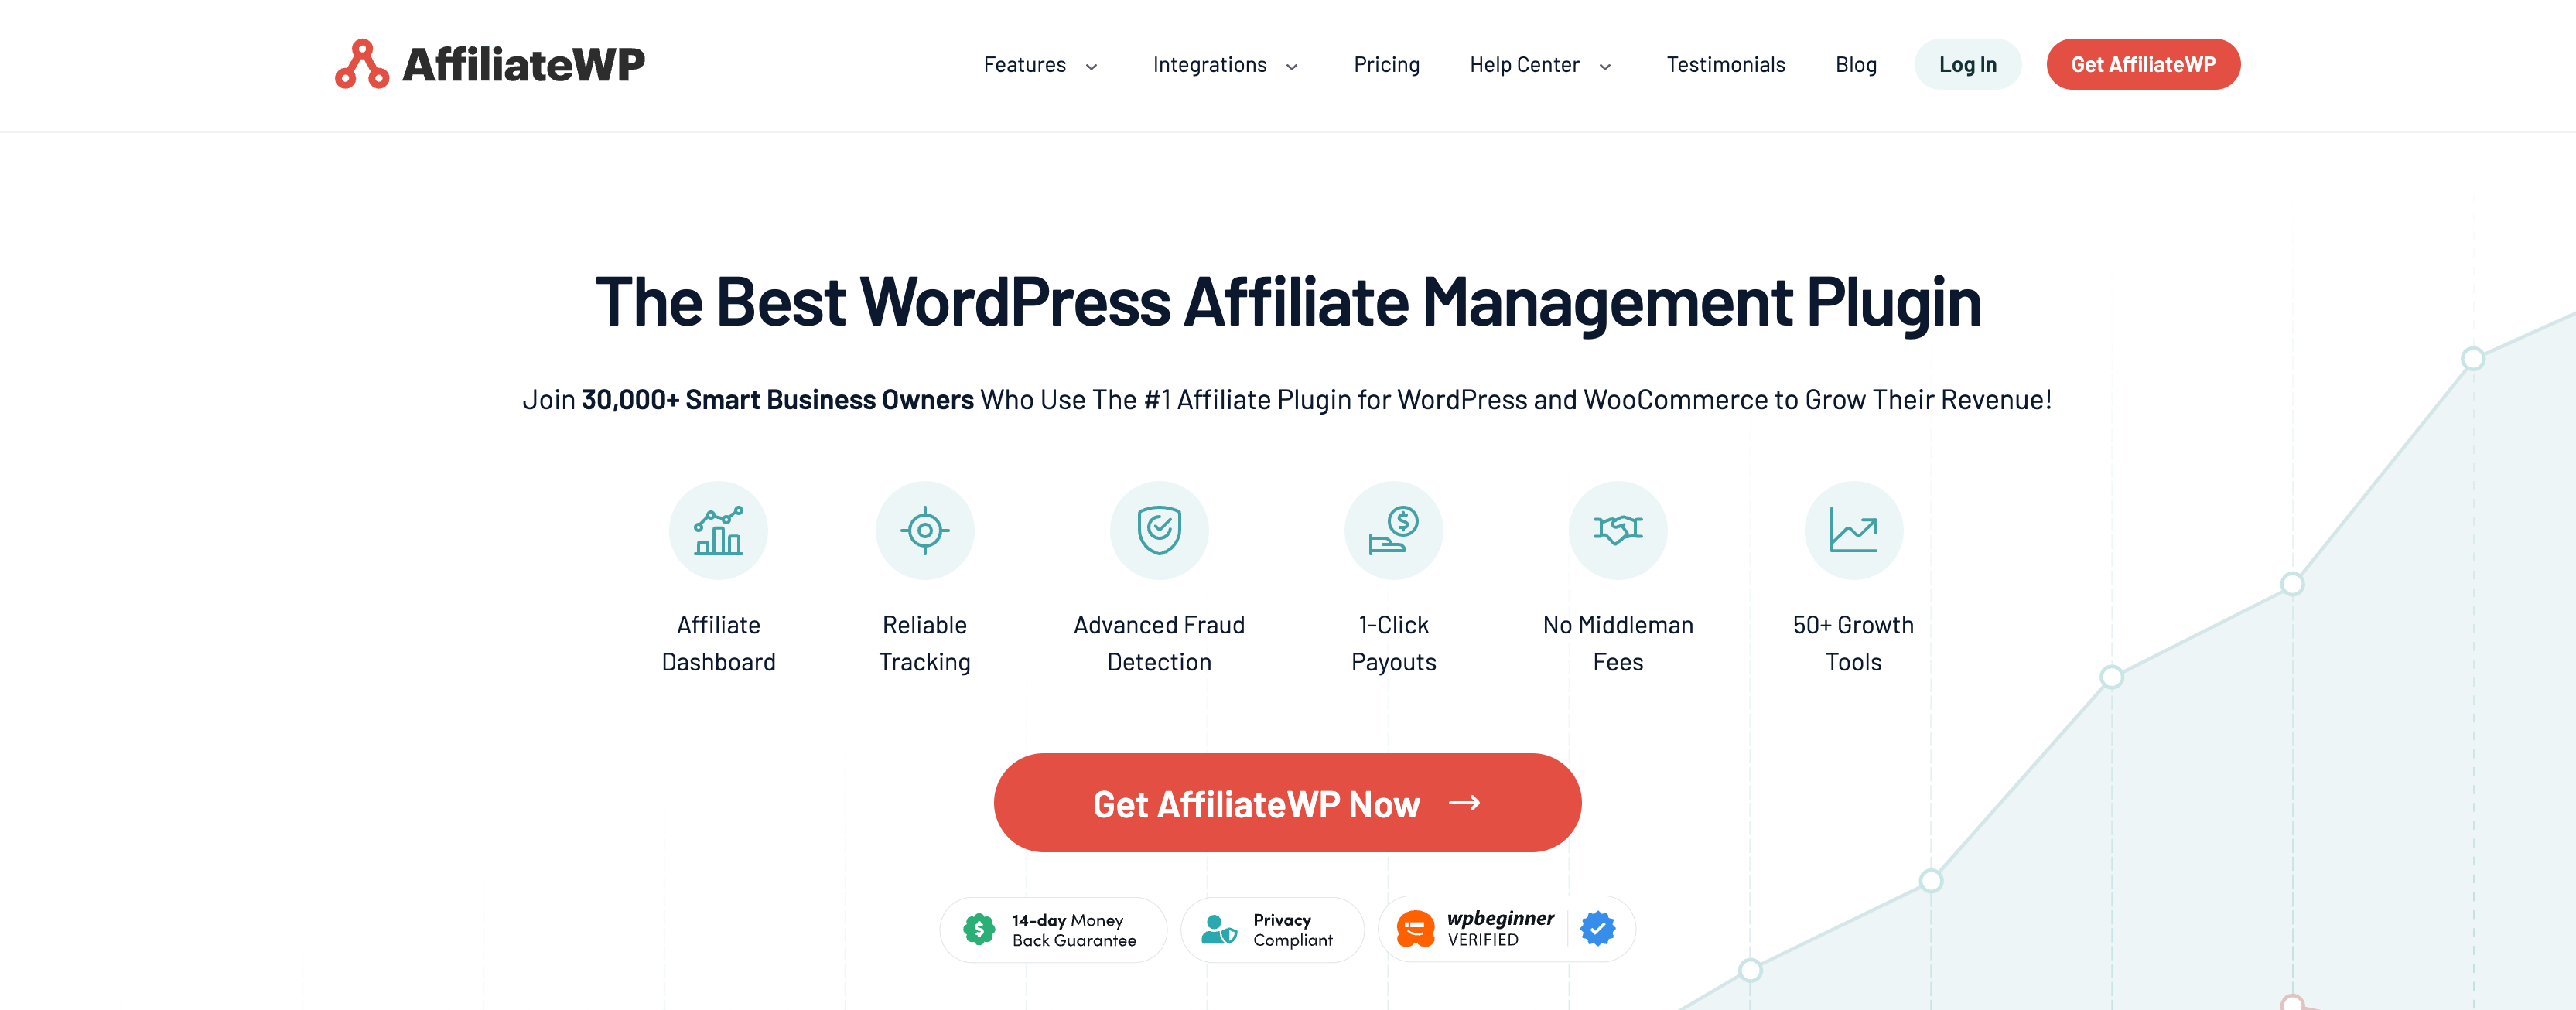 AffiliateWP Home Page.png